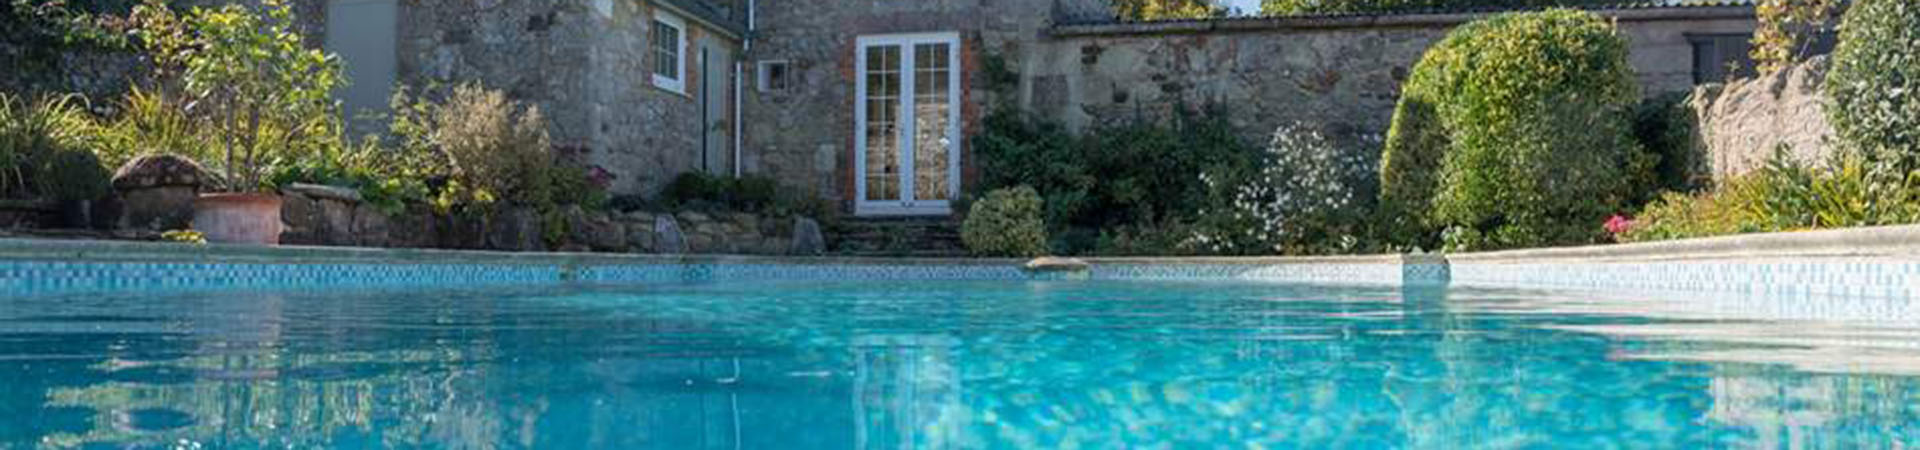 Holiday cottages with pools in North Devon